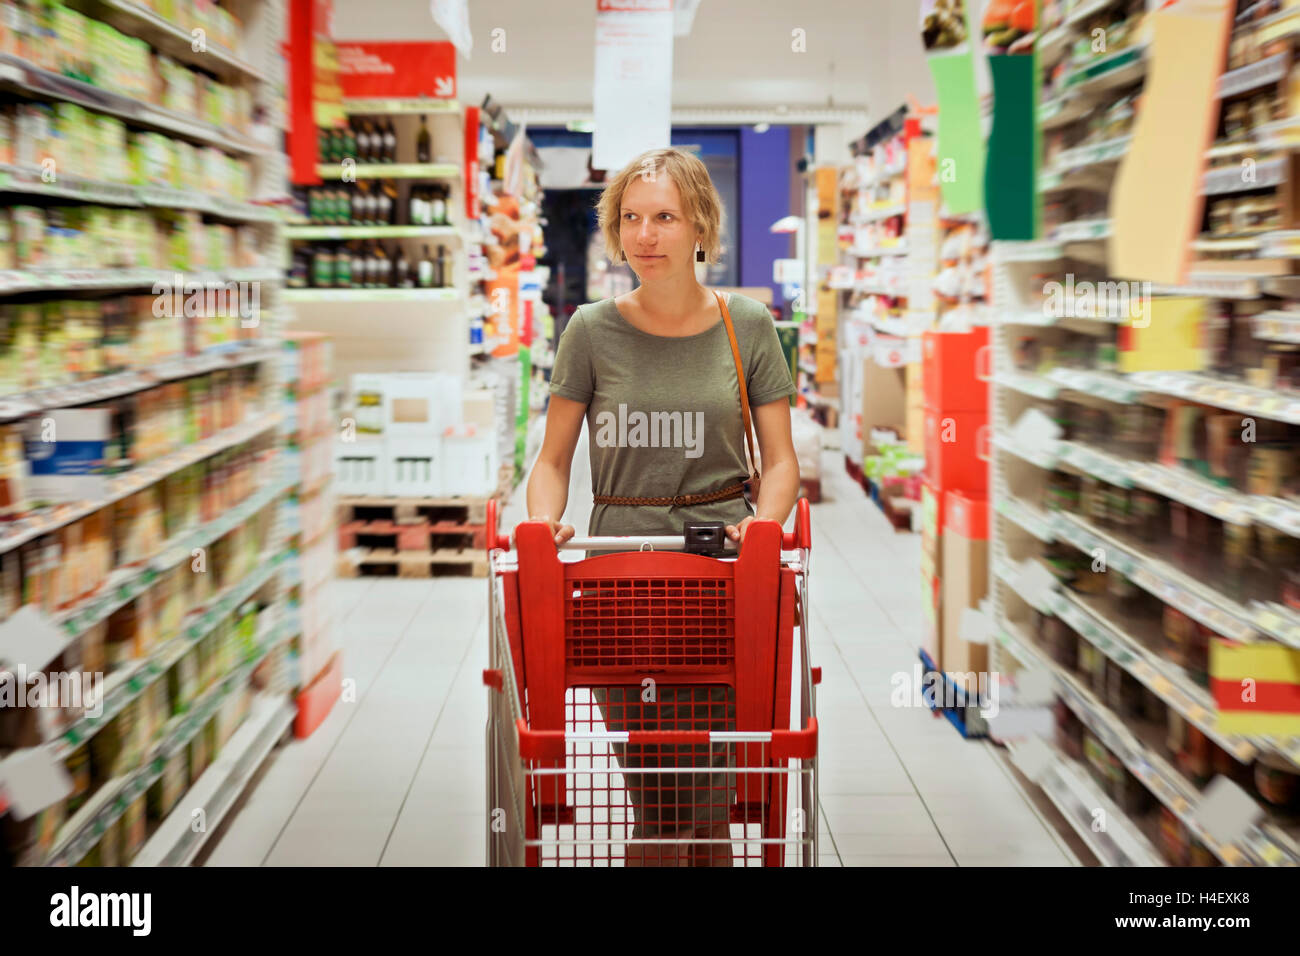 Smiling woman with a shopping cart at the supermarket Stock Photo